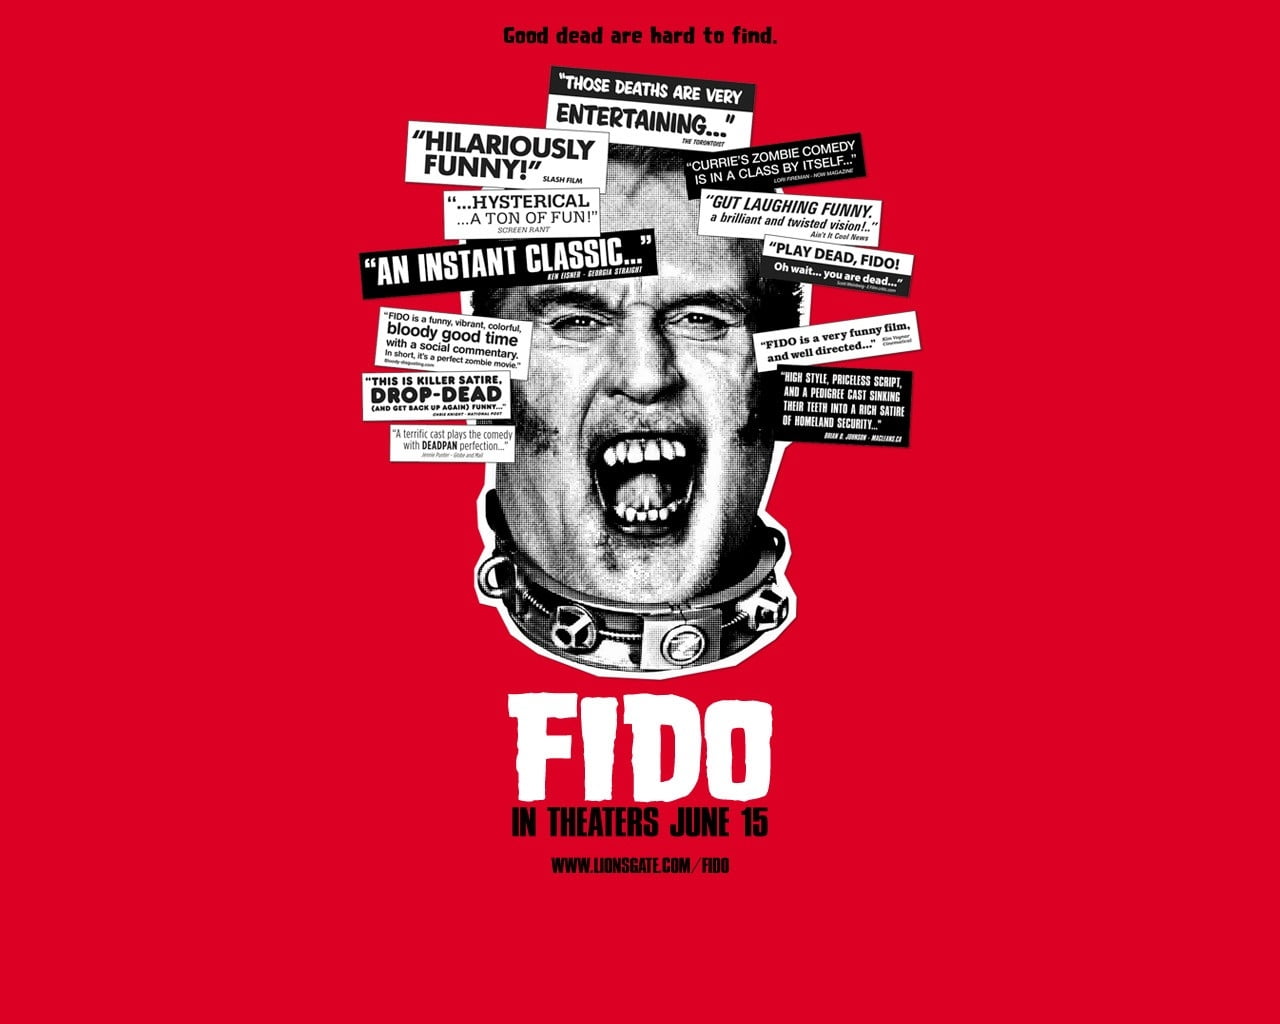 Fido in theaters June 15 poster